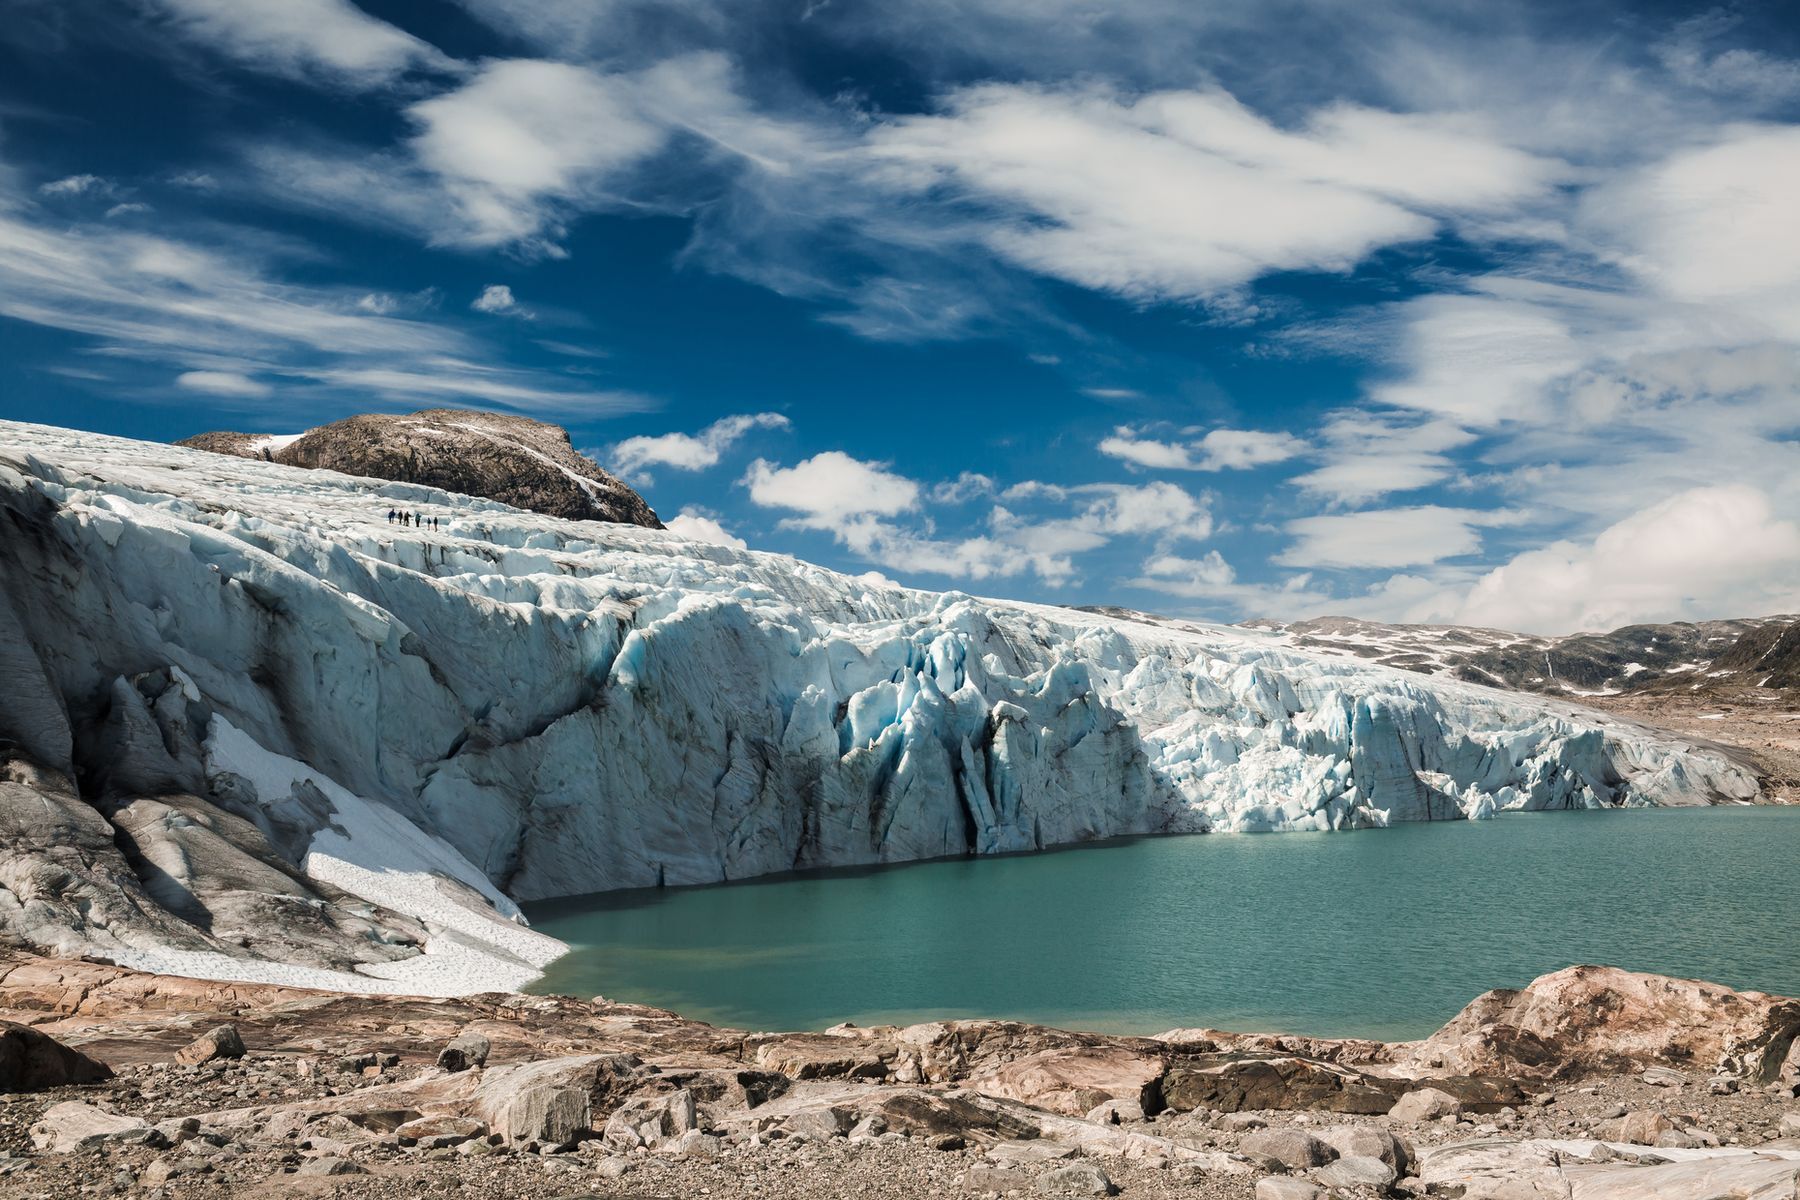 With a surface area of over 475 square kilometres (183 square miles), this is the largest continental glacier in Europe. Visitors from the world over are drawn to <a href="https://www.visitnorway.com/listings/jostedalsbreen-national-park/5160/?lang=usa" rel="noreferrer noopener">Jostedalsbreen</a> to marvel at its astonishing crevasses and fascinating glacial formations. For favourable, safe weather conditions, it’s best to explore this icy wonder between June and August.